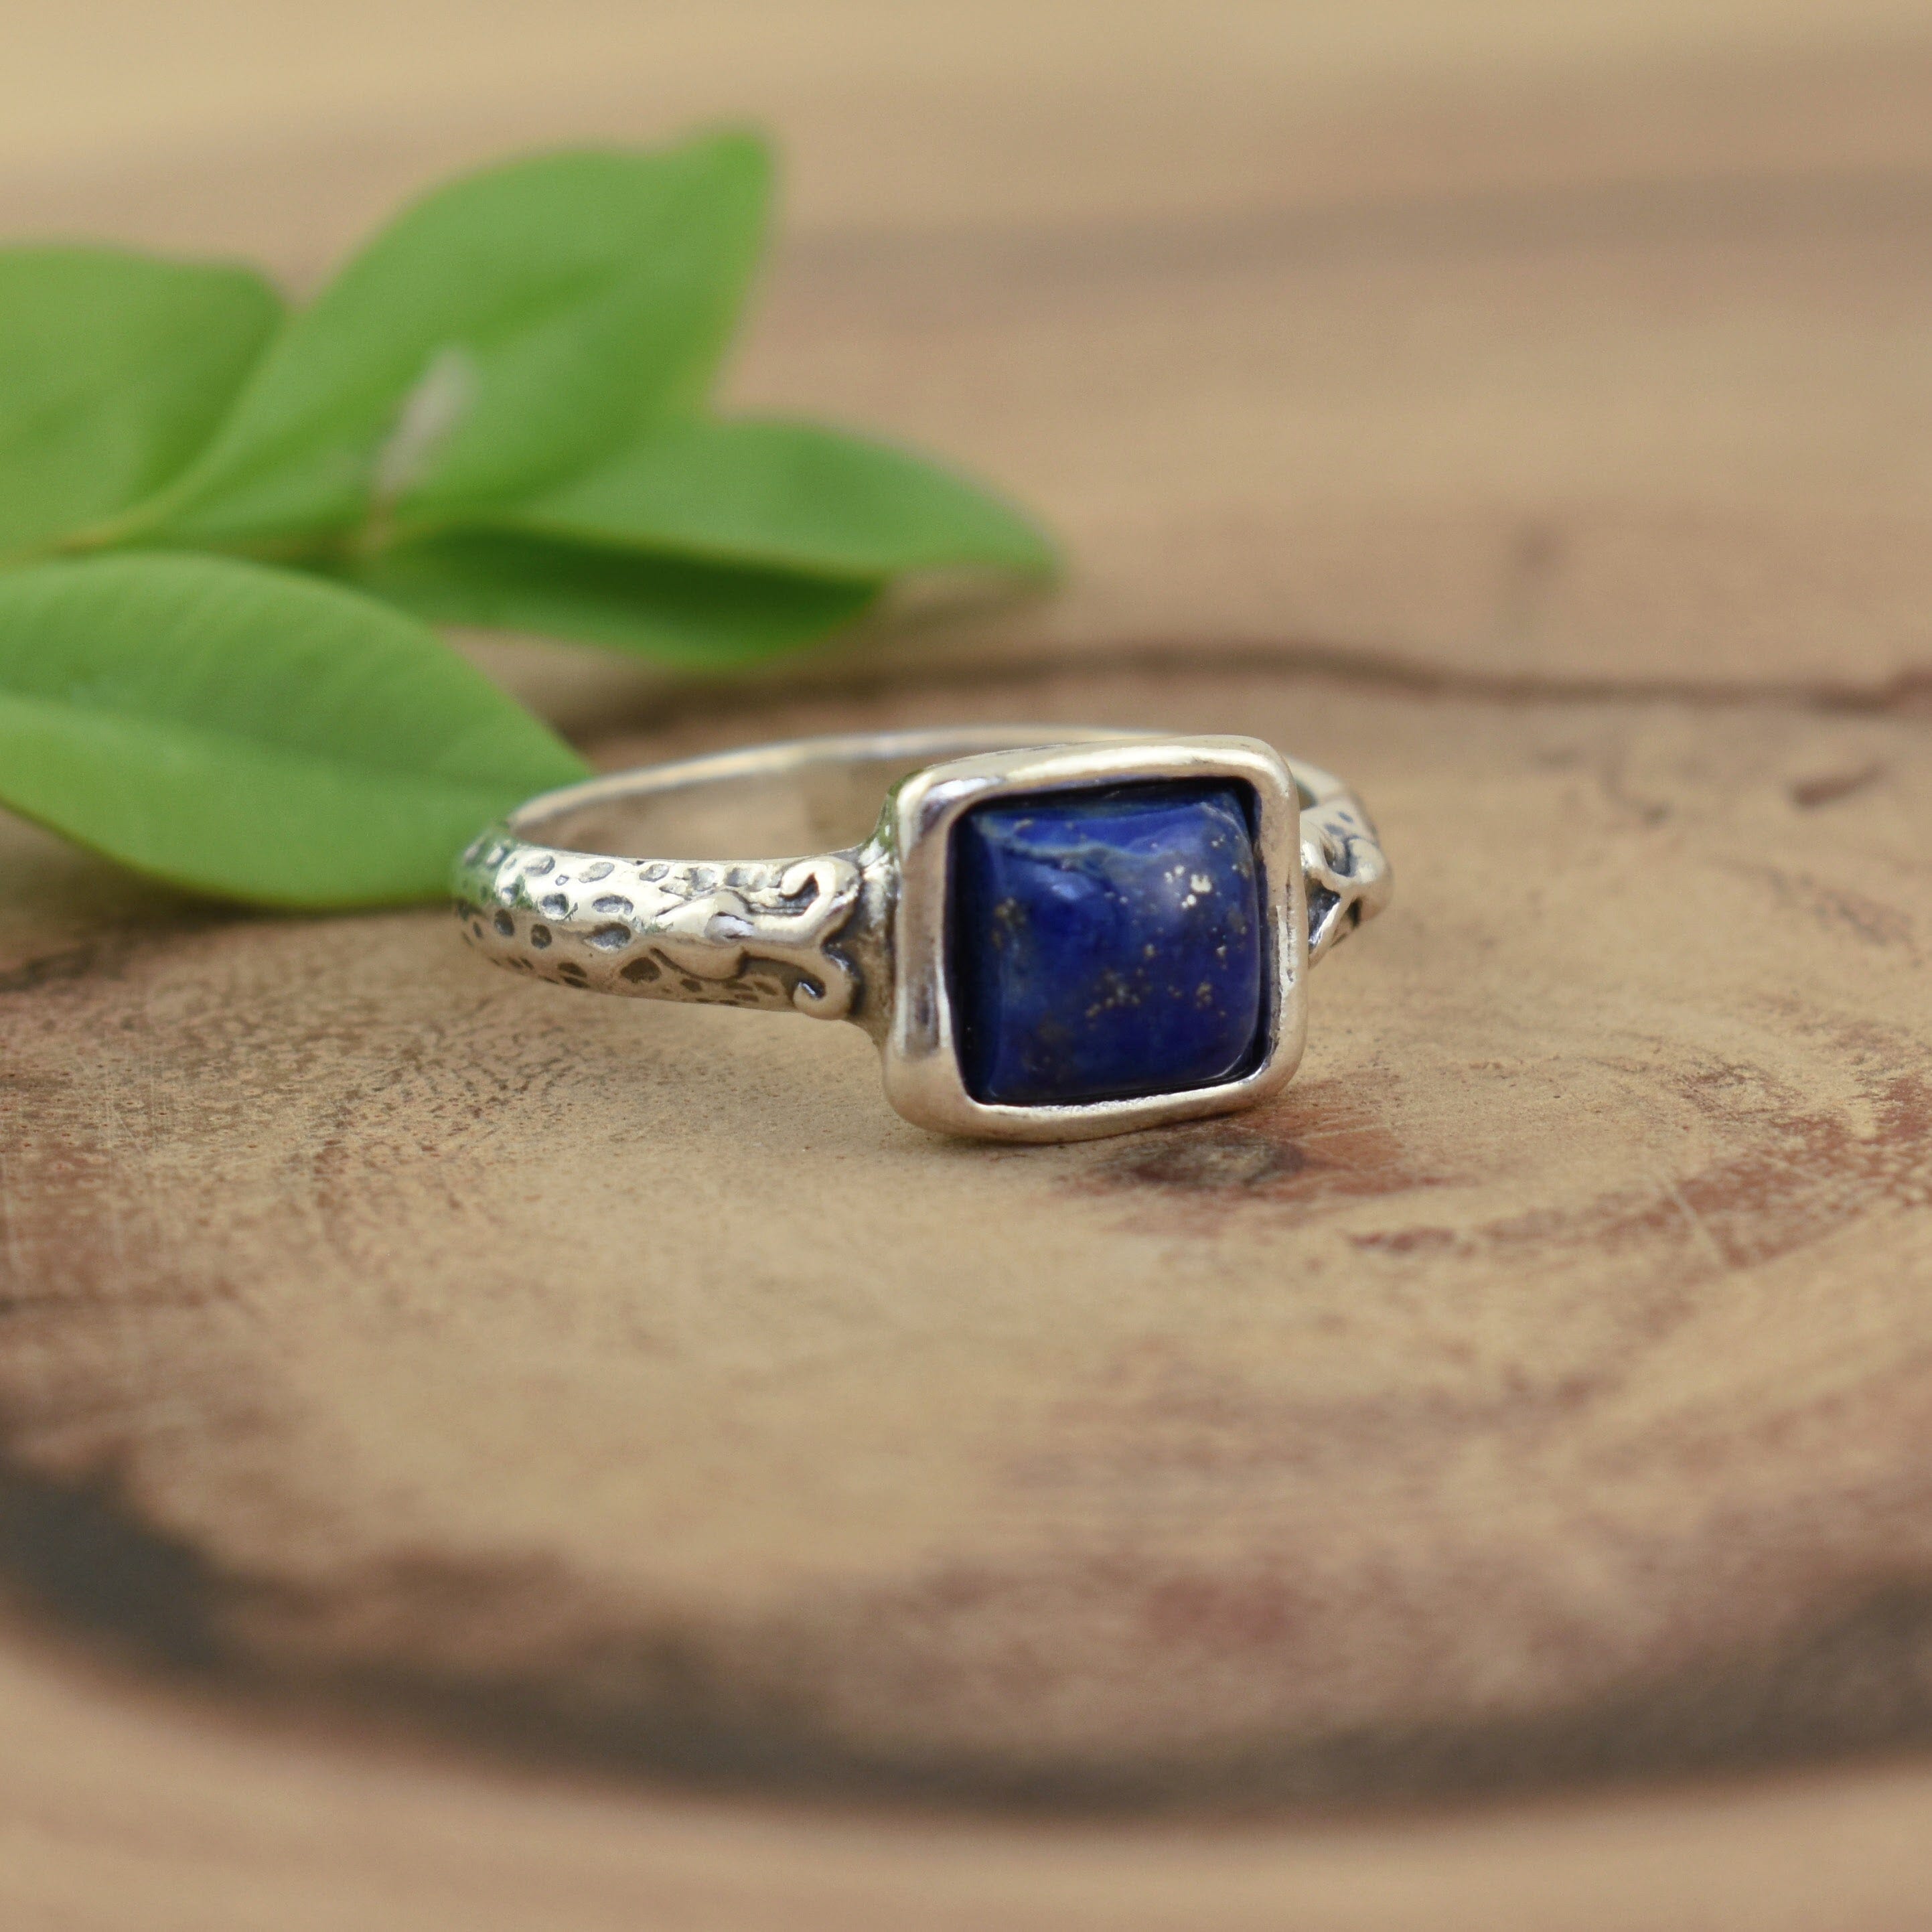 Square blue lapis ring set in oxidized sterling silver